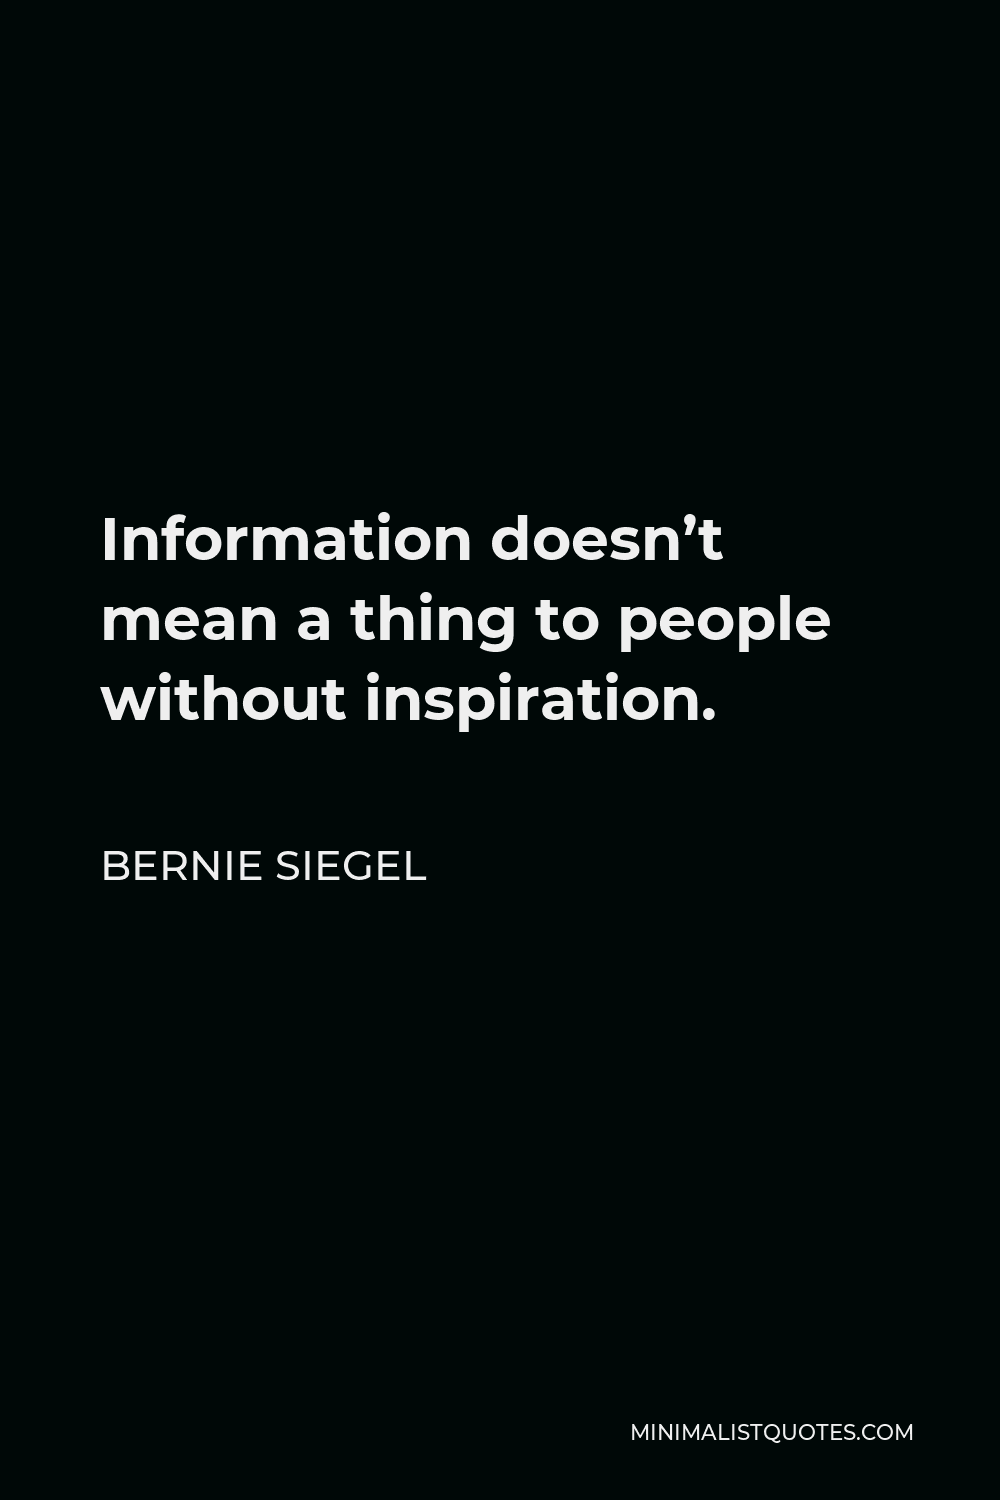 Bernie Siegel Quote - Information doesn’t mean a thing to people without inspiration.